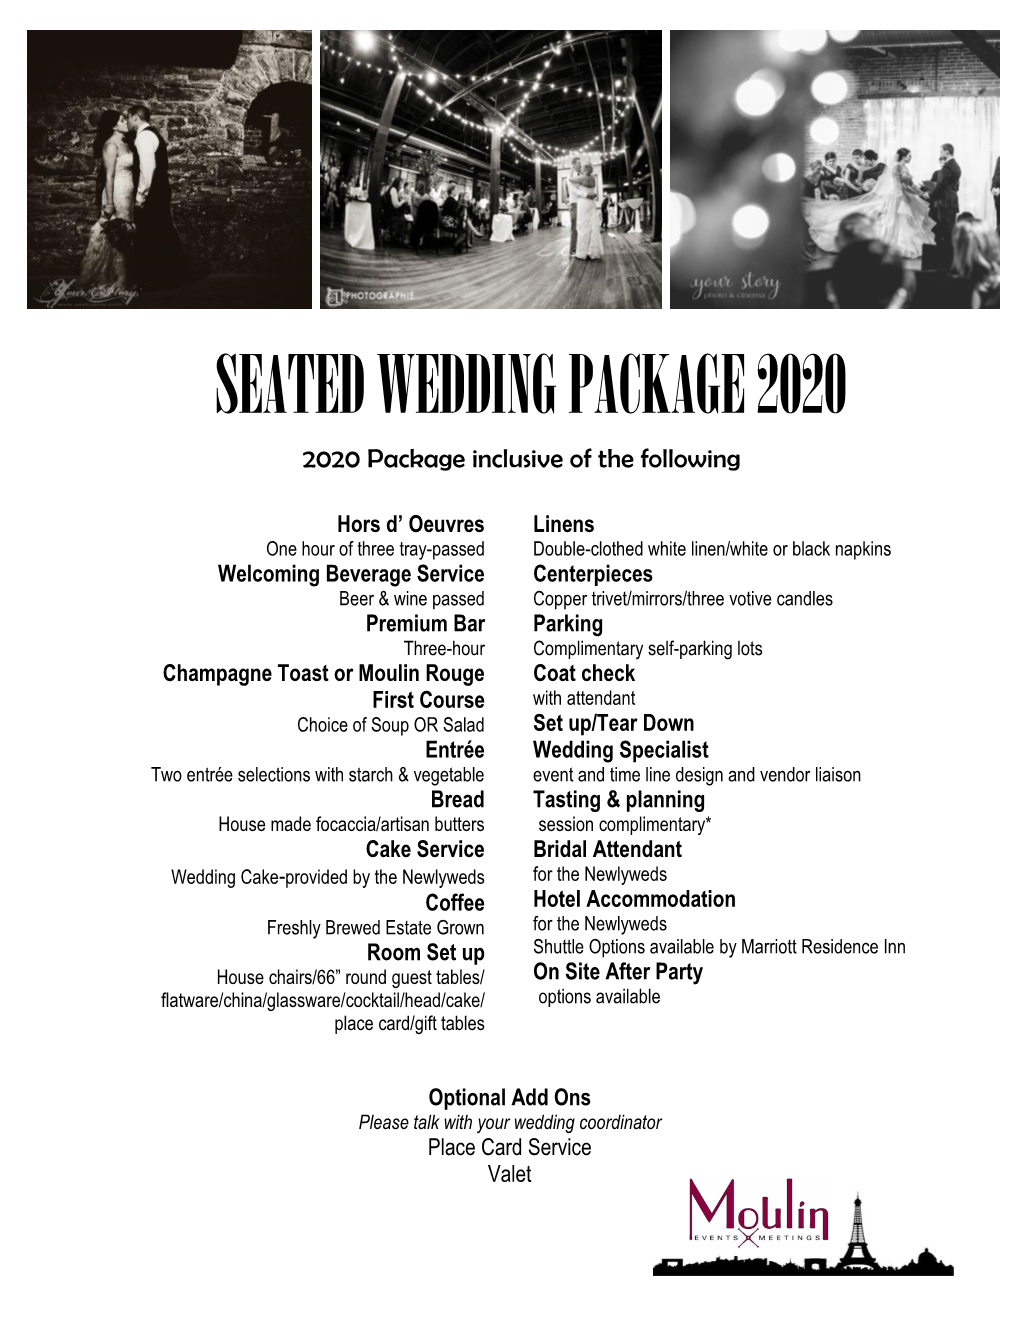 SEATED WEDDING PACKAGE 2020 2020 Package Inclusive of the Following